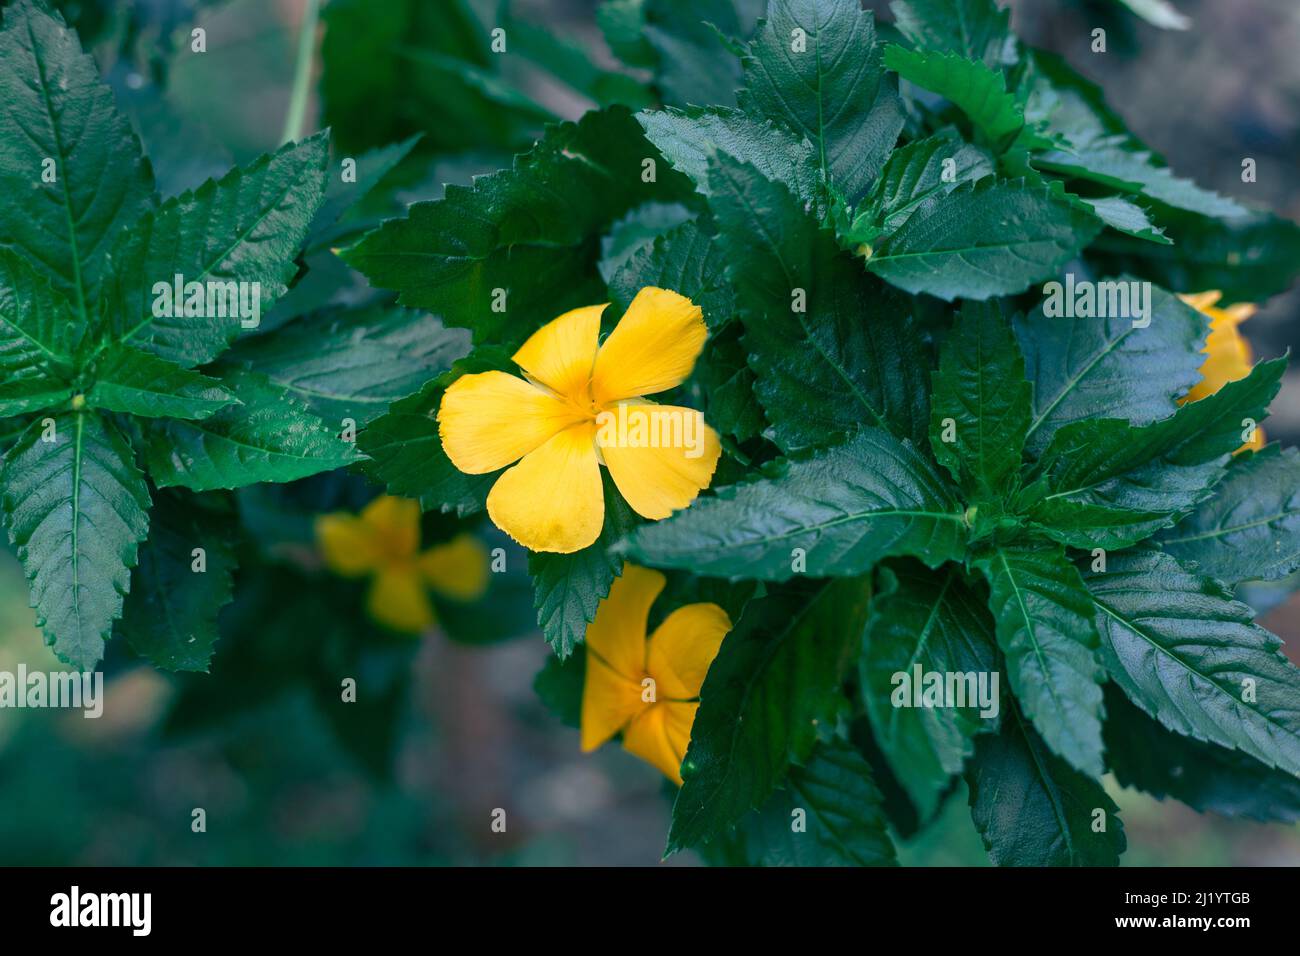 Fragrant damiana yellow flower with dark green leaves. Aphrodisiac and antidepressant. Stock Photo